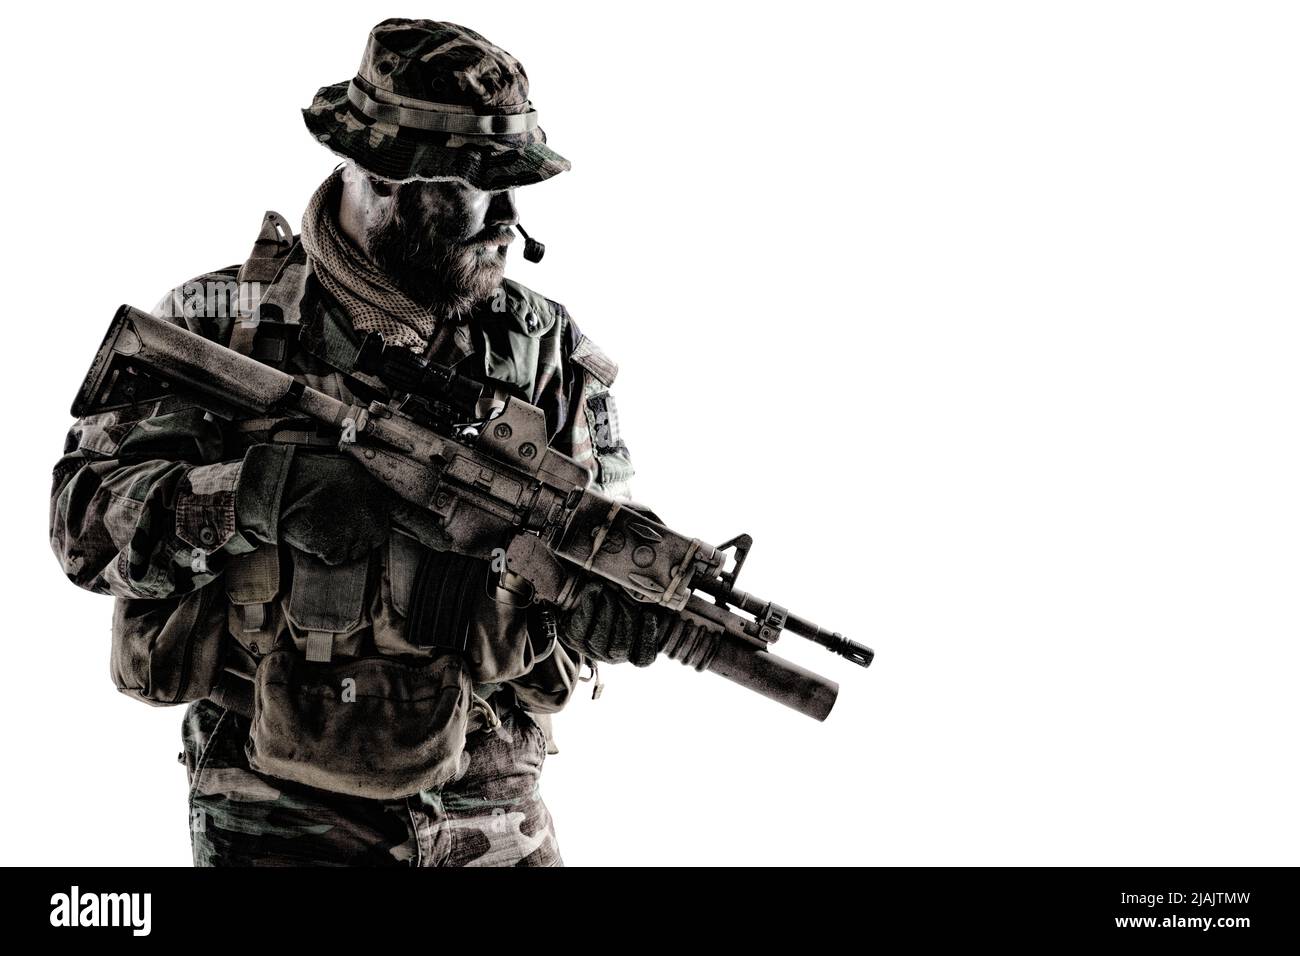 Commando soldier in camouflage uniform and boonie hat, armed with service rifle, studio shot on white background. Stock Photo